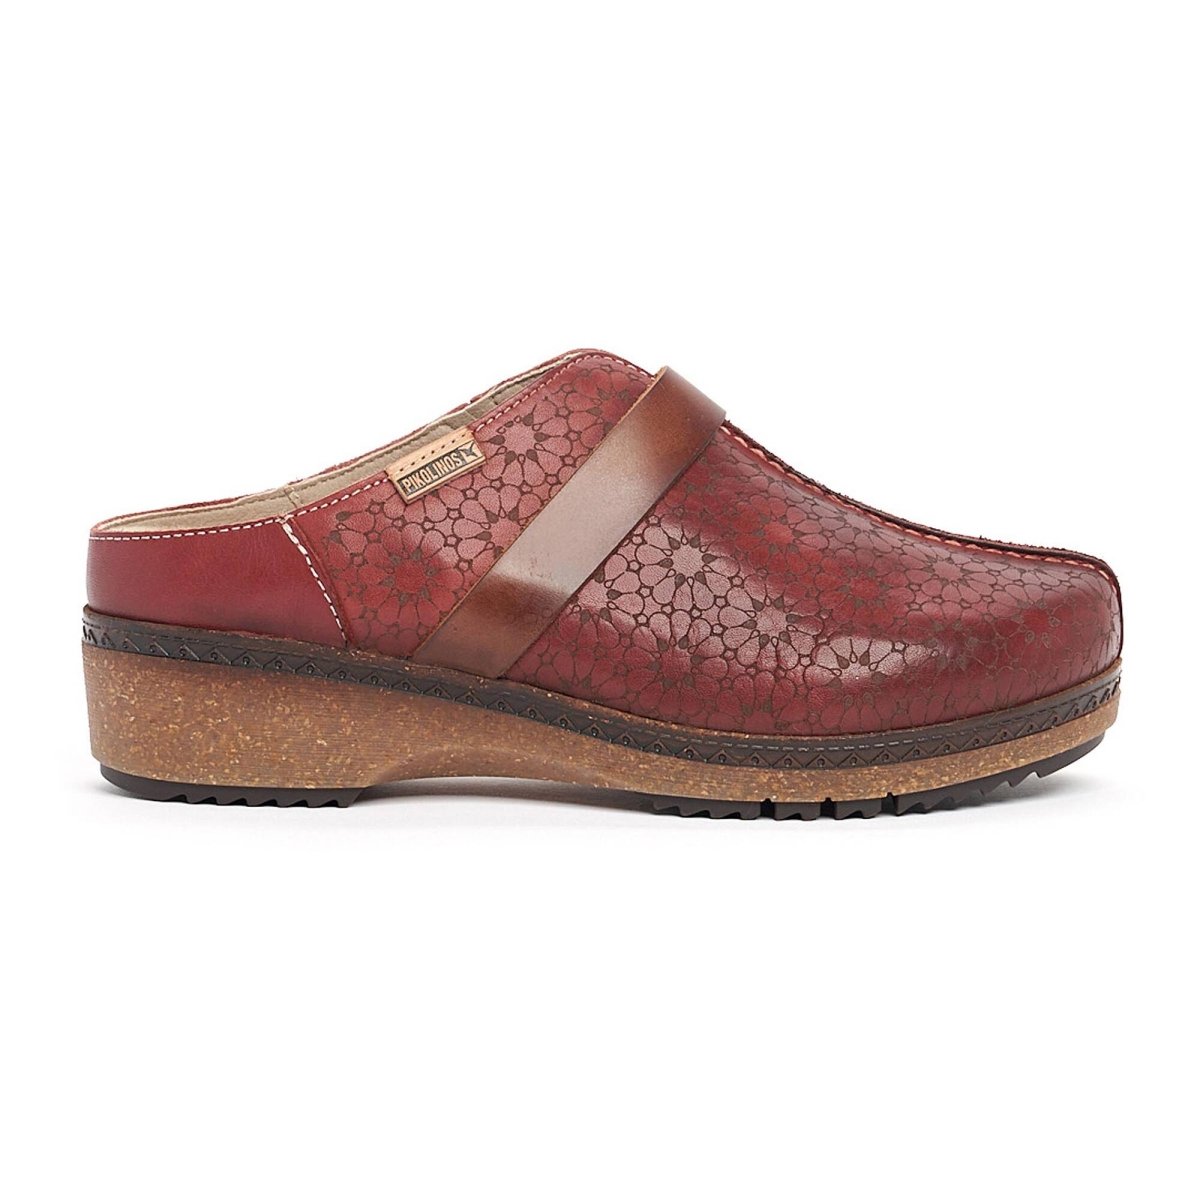 PIKOLINOS GRANADA NAW0W-3656C1 WOMEN'S LOAFERS CLOG SHOES IN ARCILLA - TLW Shoes